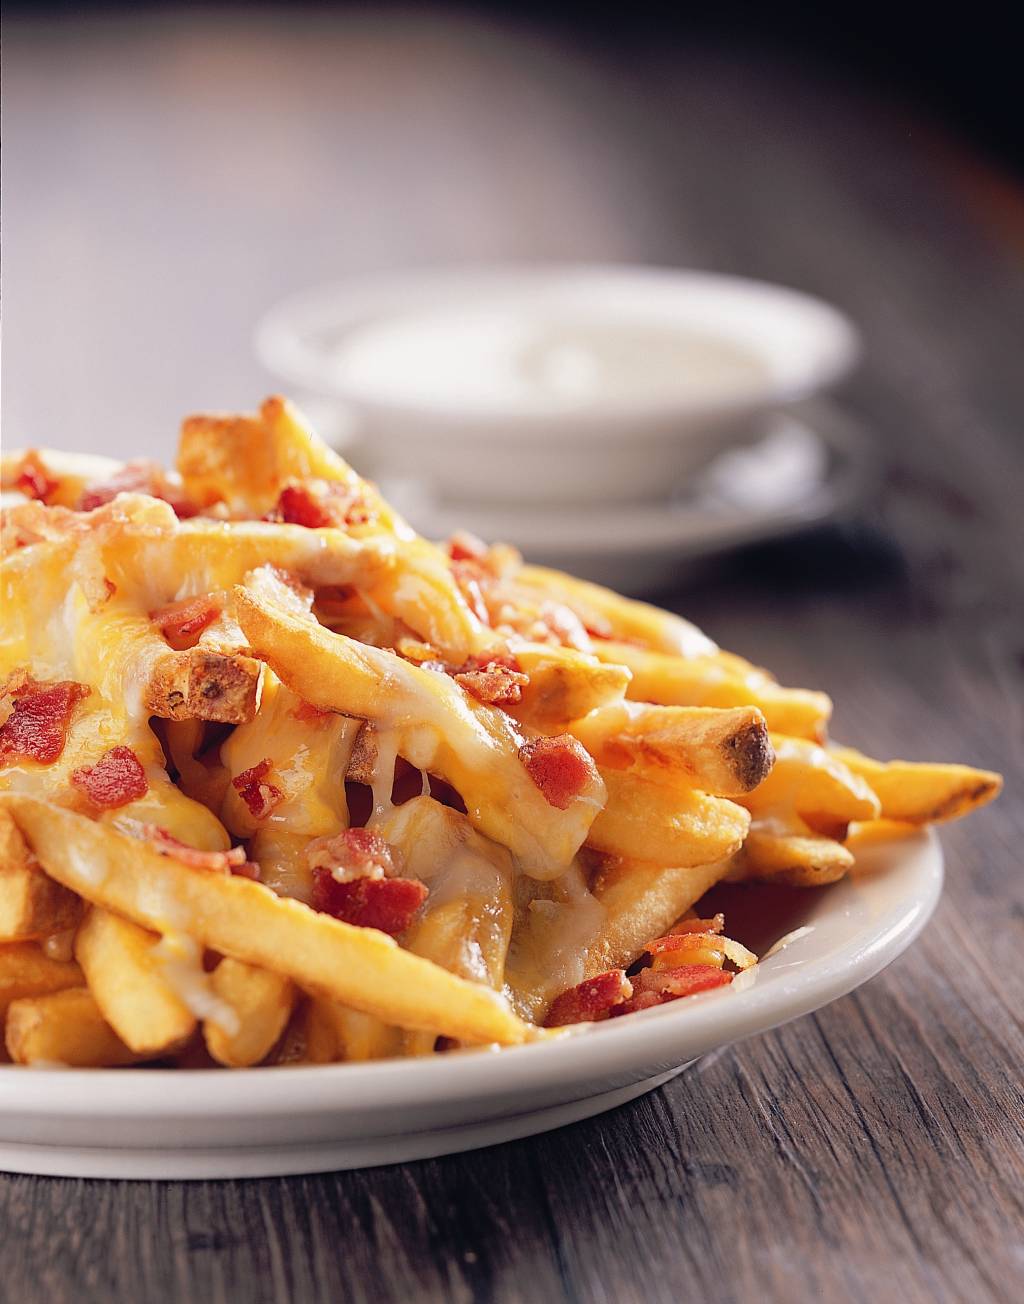 Aussie_Cheese_Fries - Outback